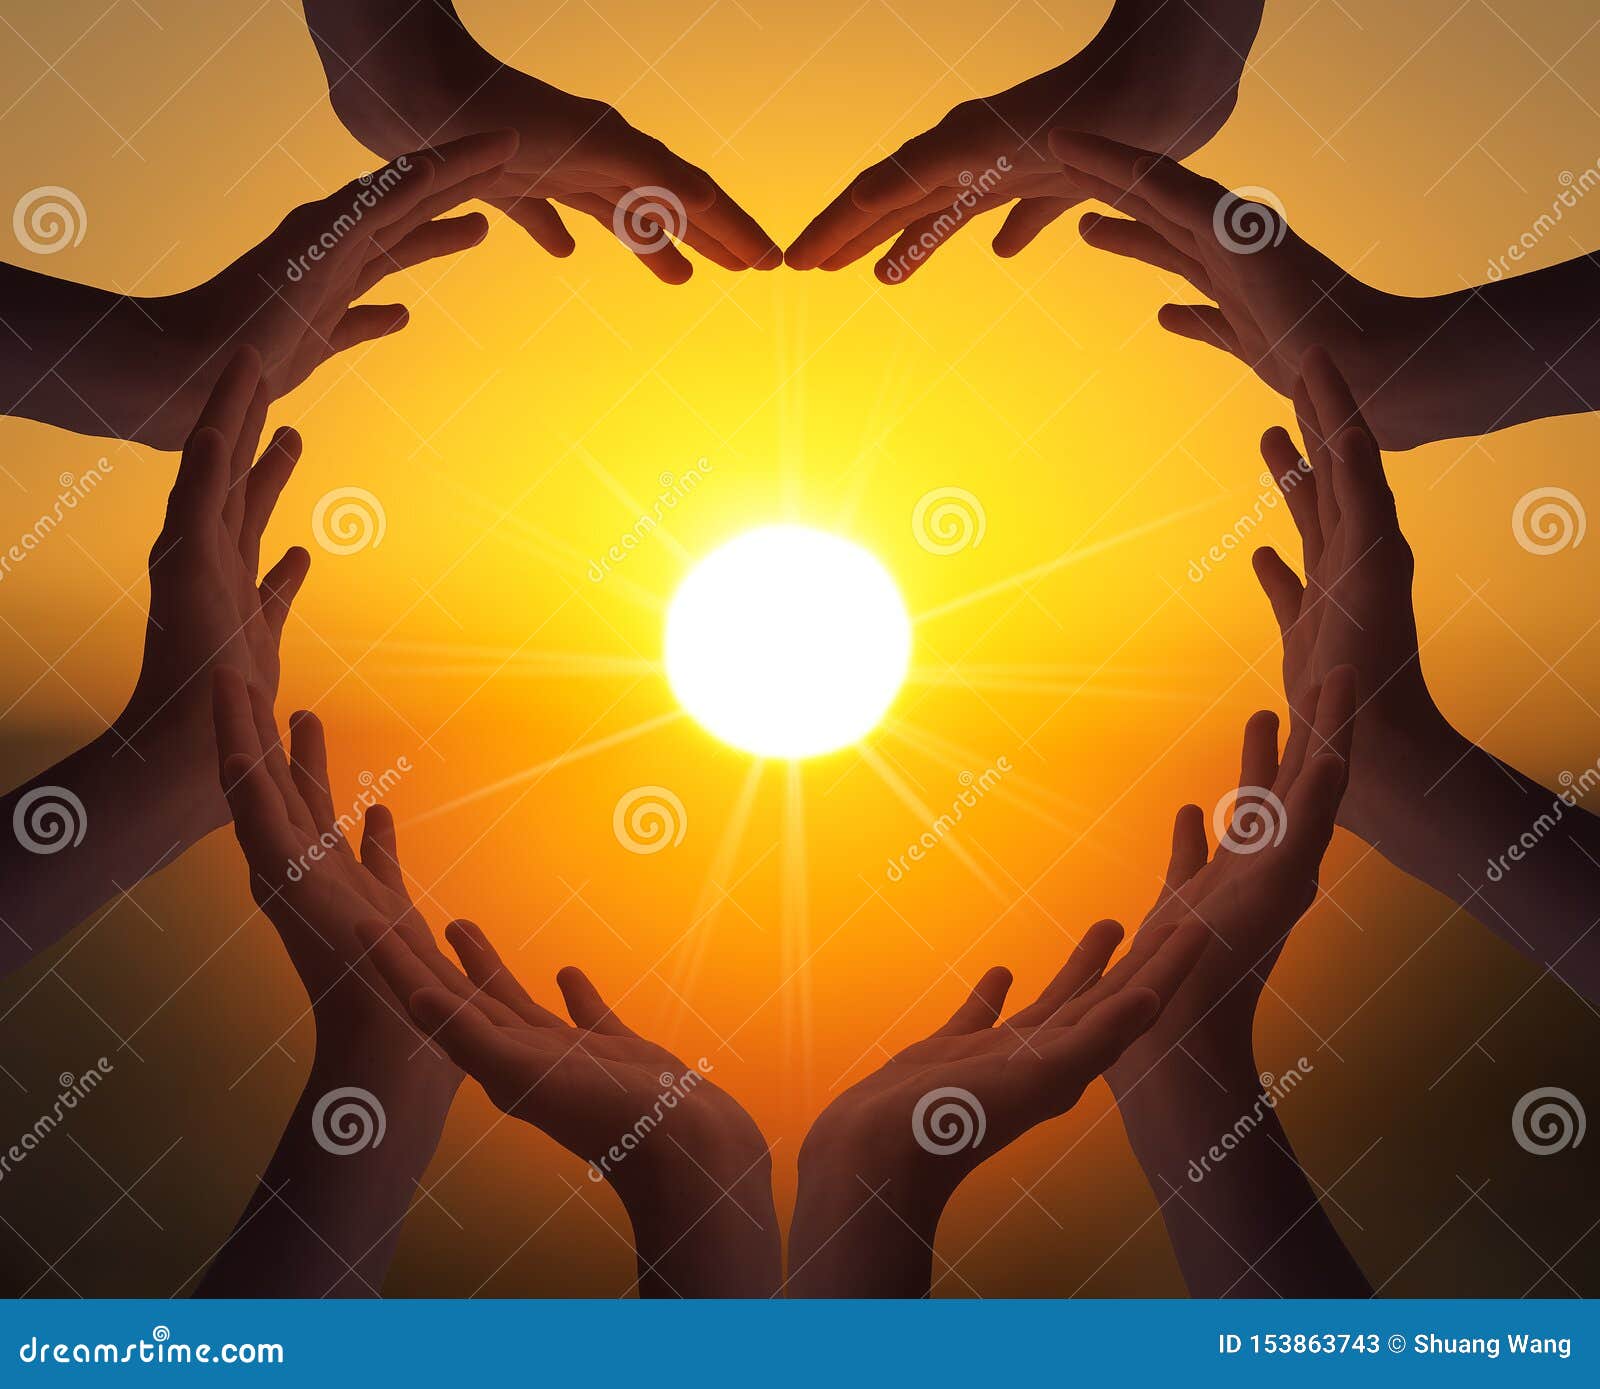 International Day of Friendship Concept: Many People Hands in Shape of  Heart on Blurred Beautiful Background Stock Image - Image of friendship,  biology: 153863743